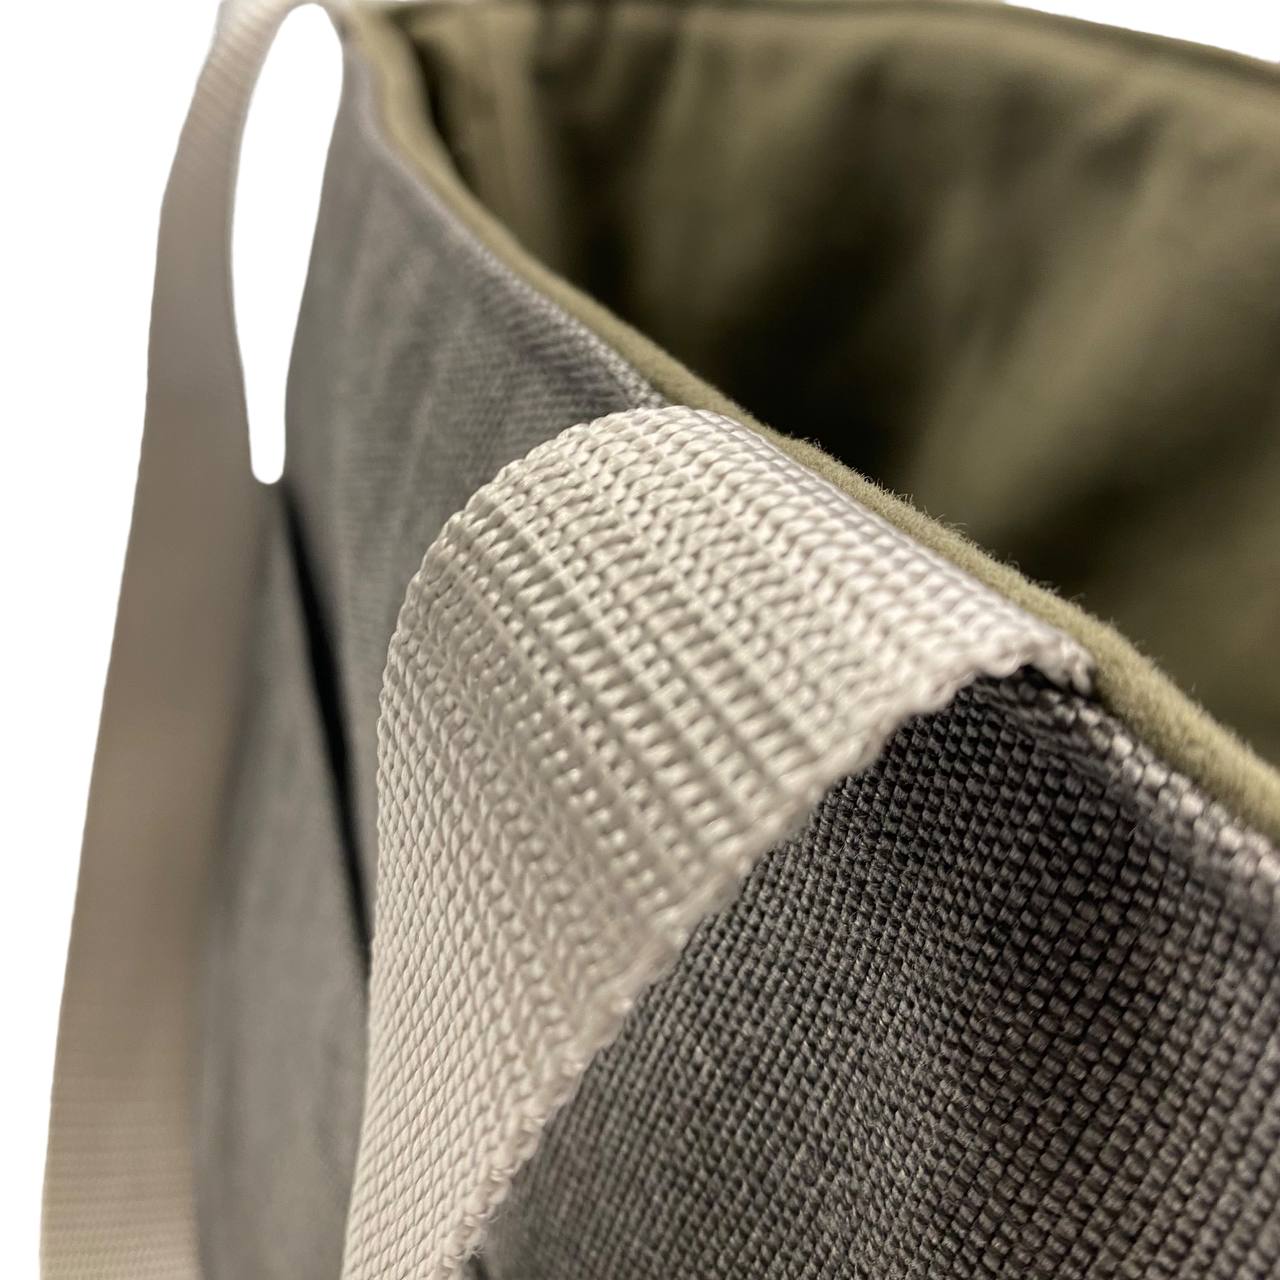 Hawk Grey and Olive Dog Carrier